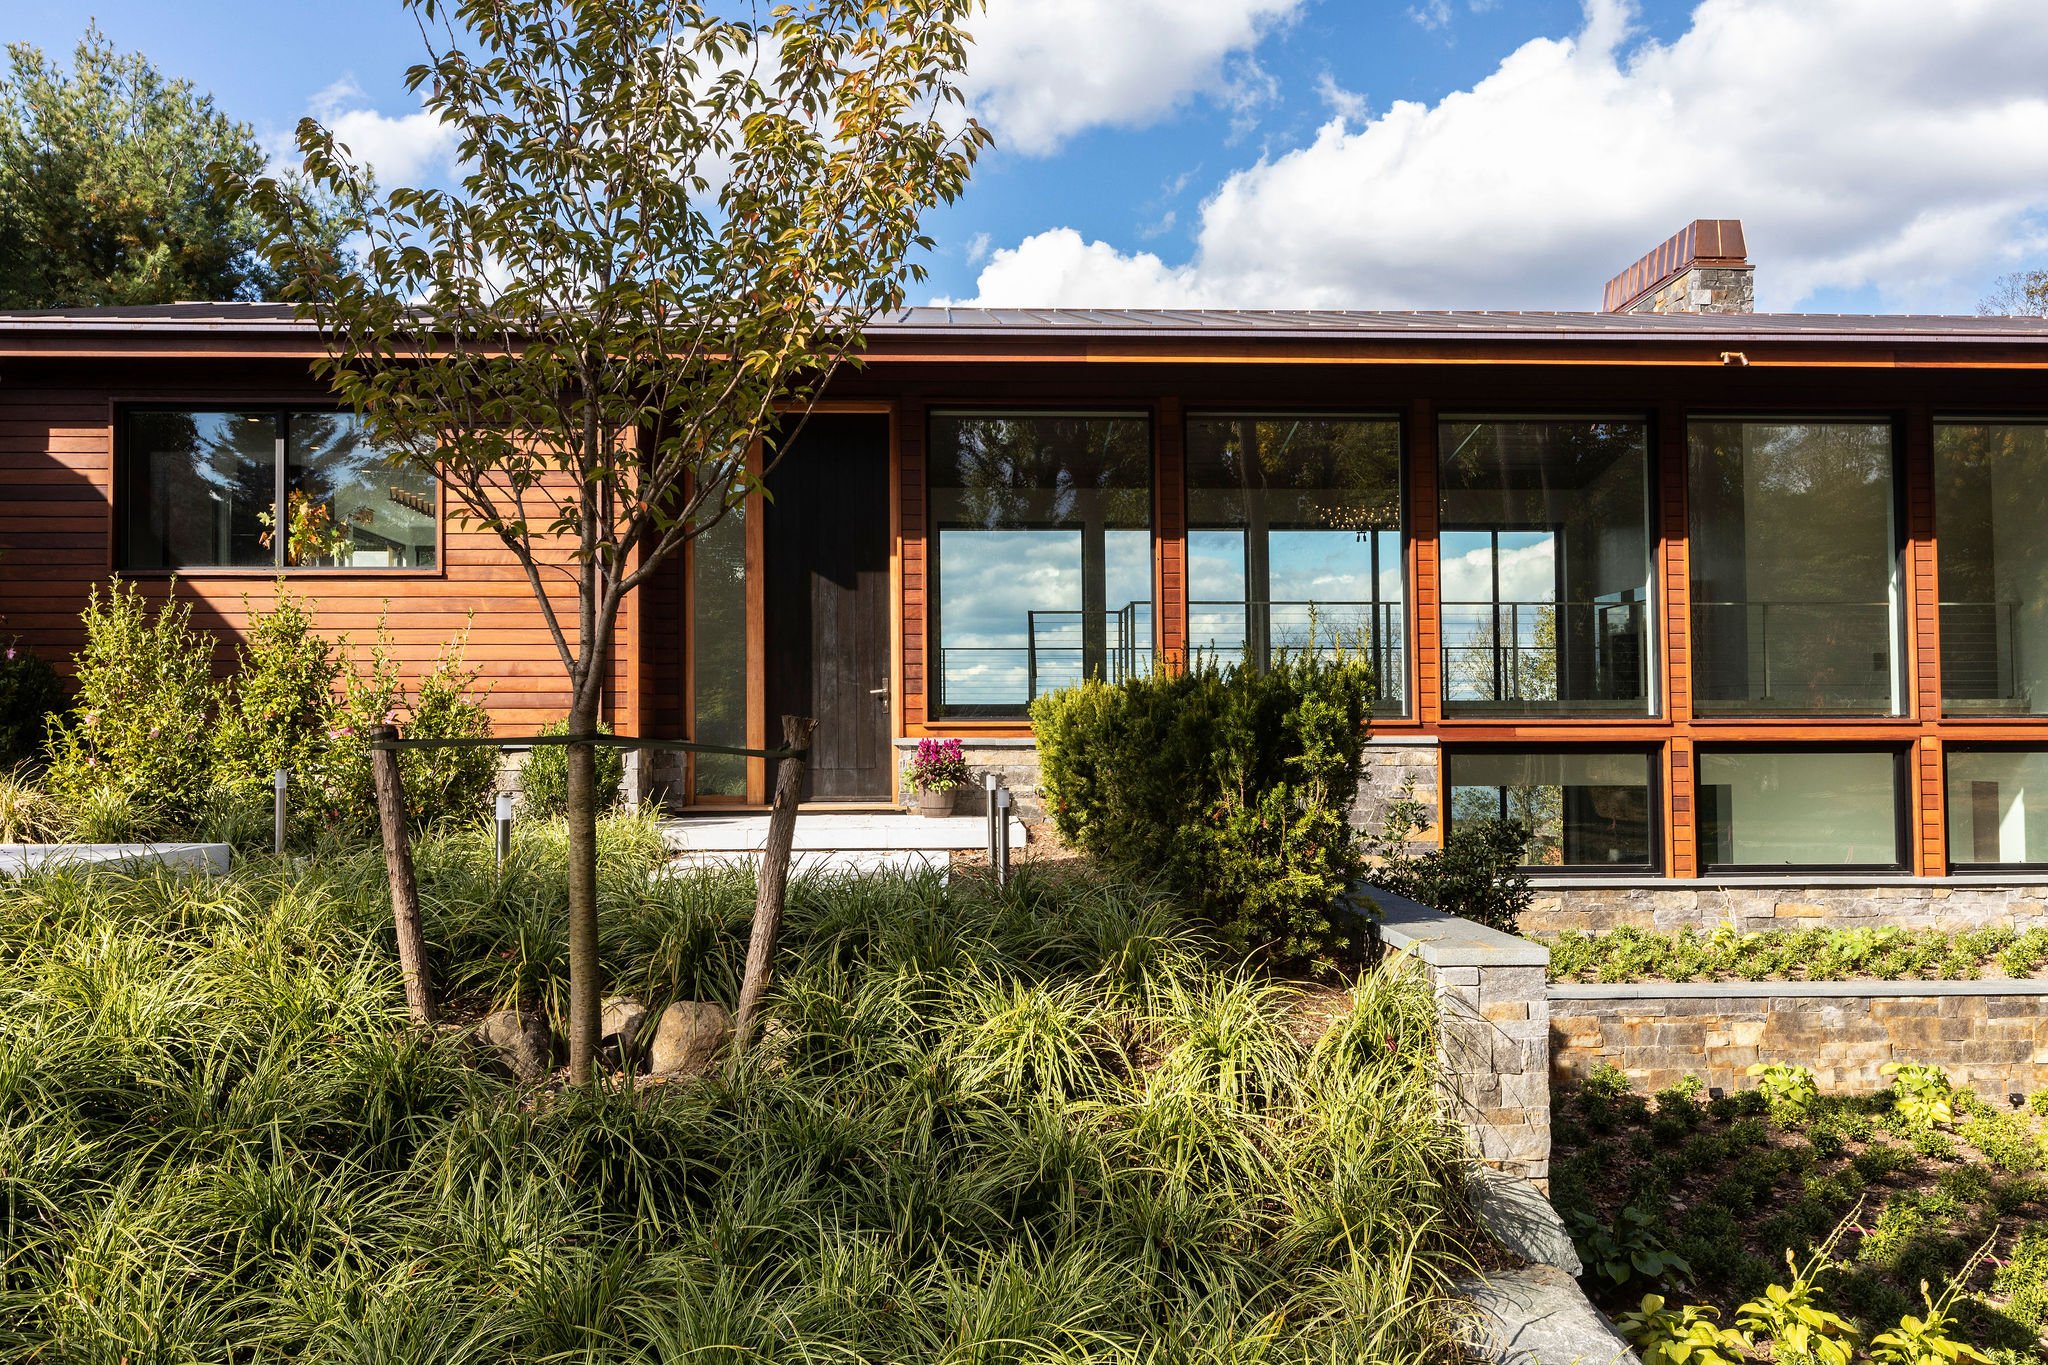  Blackened steel windows, huge stone multi-colored walls, wood siding and copper details were all designed to give this house a sense of 21st century modernism. 